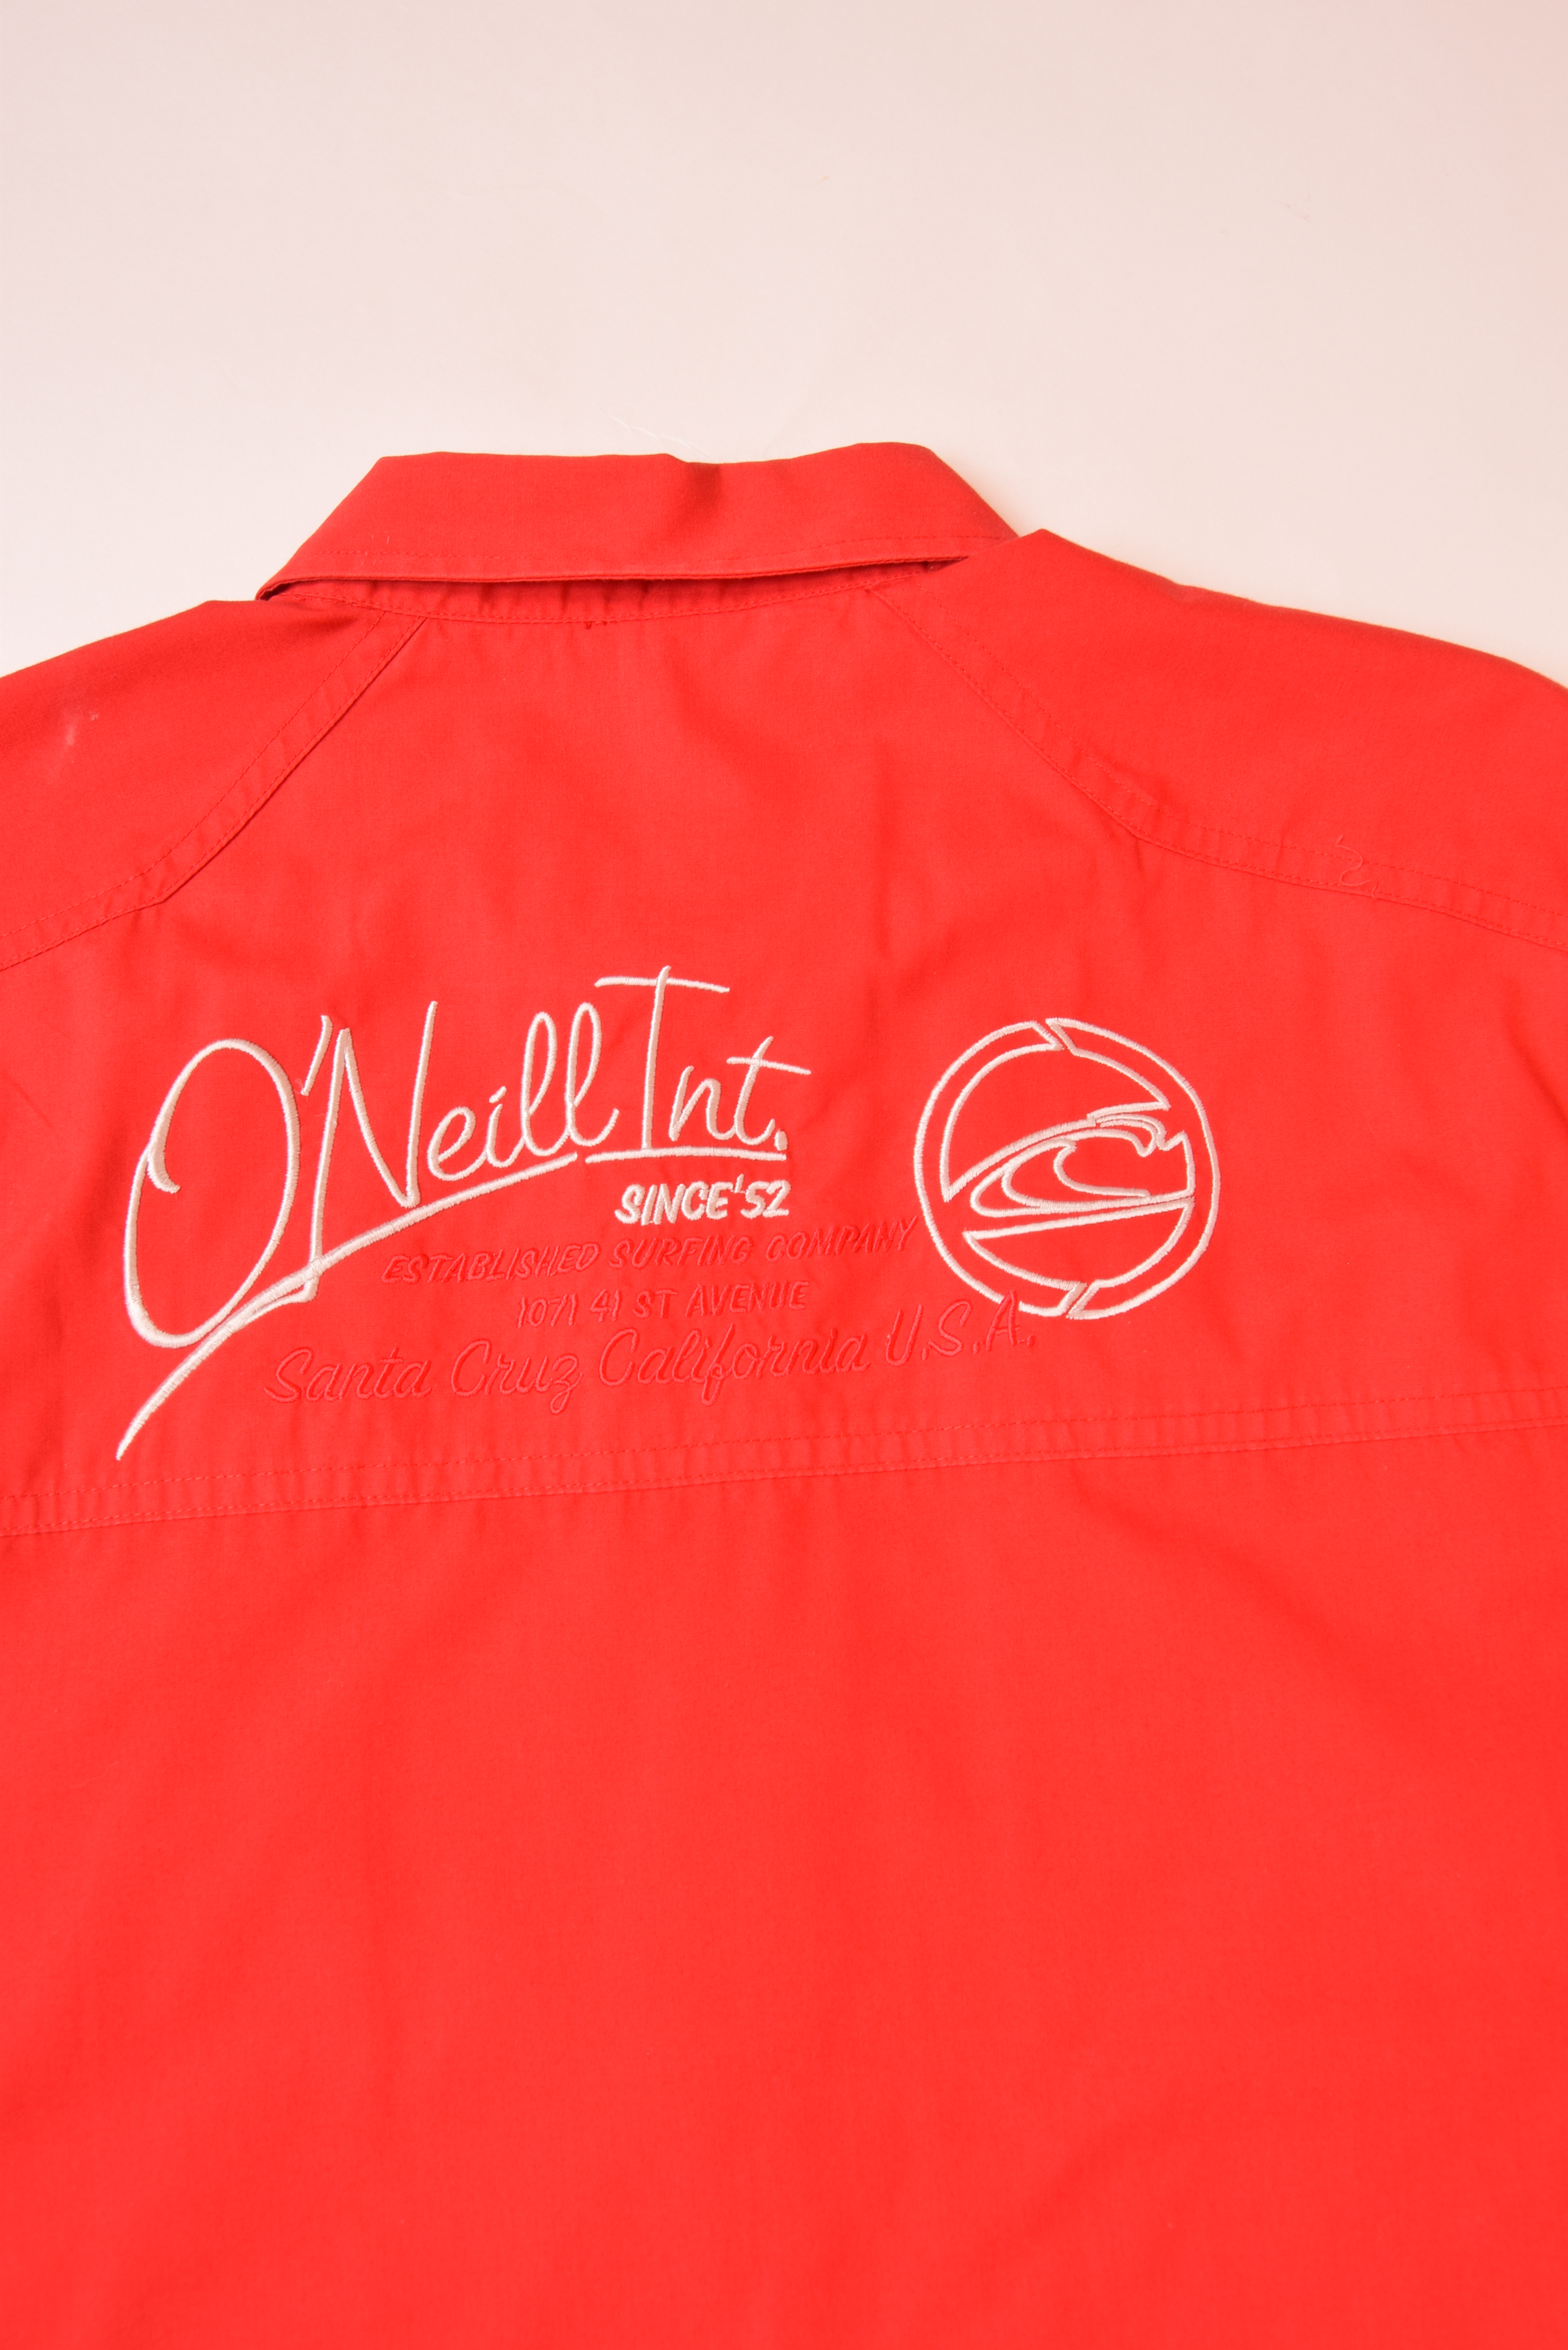 Vintage O'Neill Shirt Red Size M